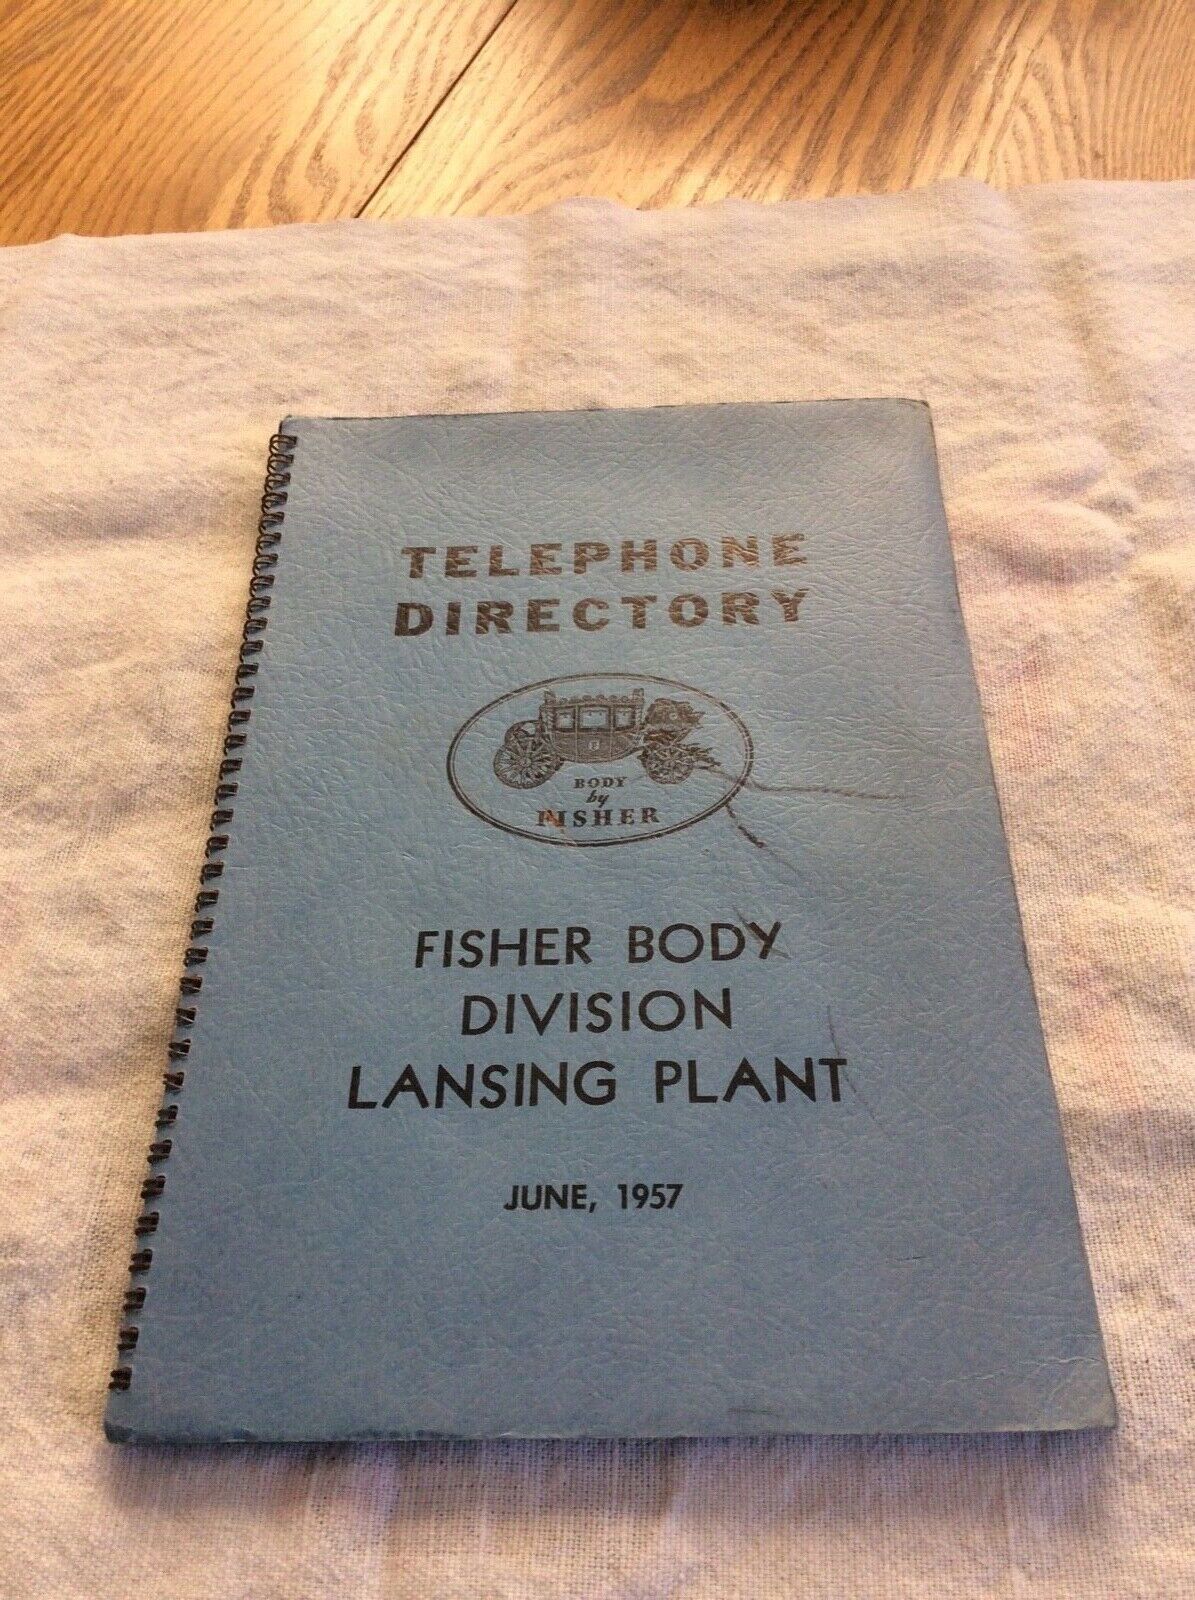 TELEPHONE DIRECTORY FISHER BODY DIVISION LANSING PLANT JUNE, 1957